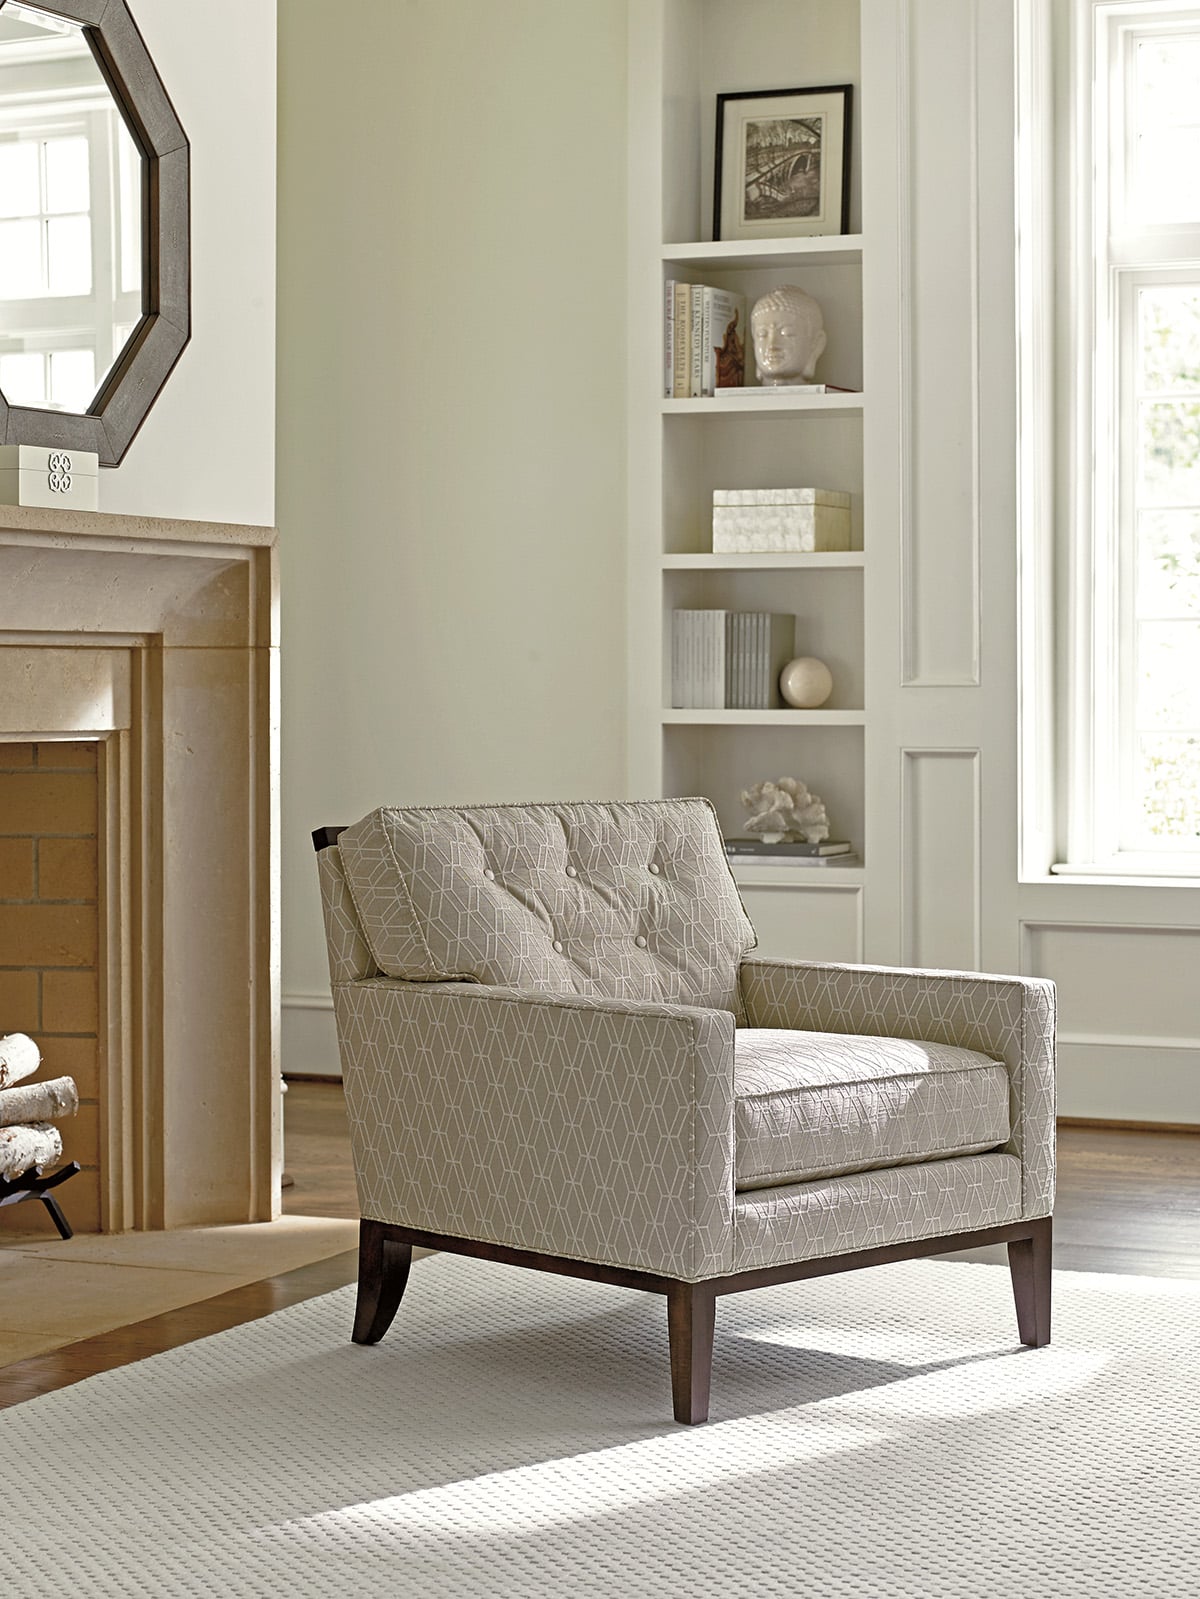 Introducing MacArthur Park: Classic contemporary furniture for today's new traditionalists